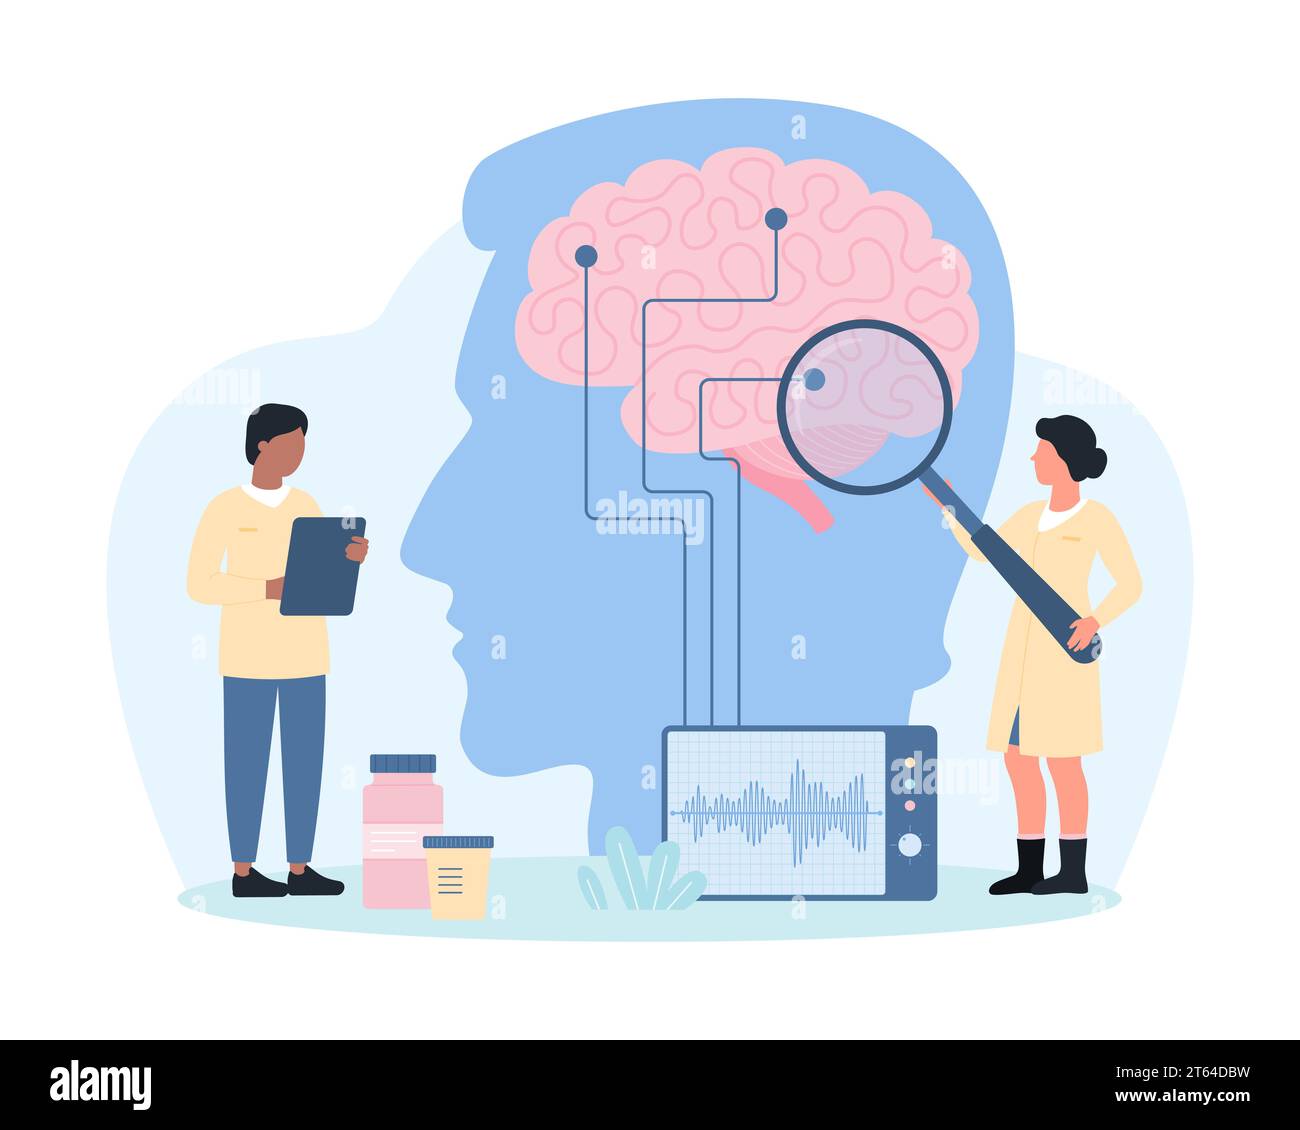 Diagnosis of brain diseases, neurology vector illustration. Cartoon tiny doctors monitoring brain waves on EEG display, neurologists research electroencephalography results with magnifying glass Stock Vector